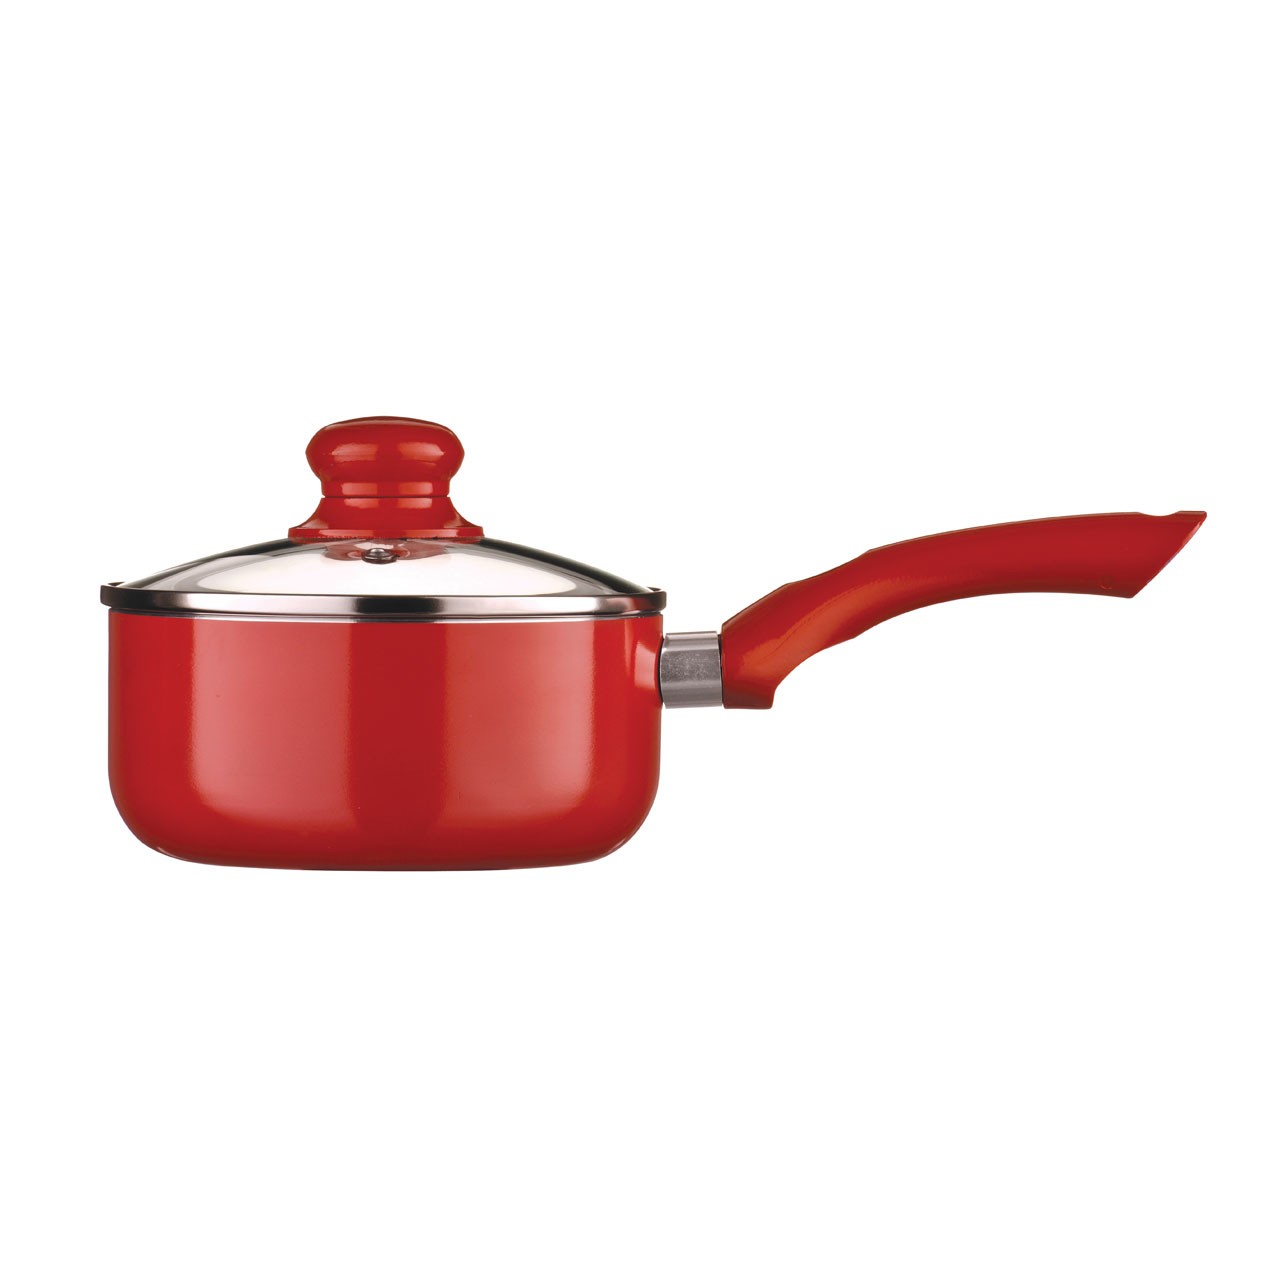 Prime Furnishing Ecocook Saucepan with Glass Lid, 16 cm - Red